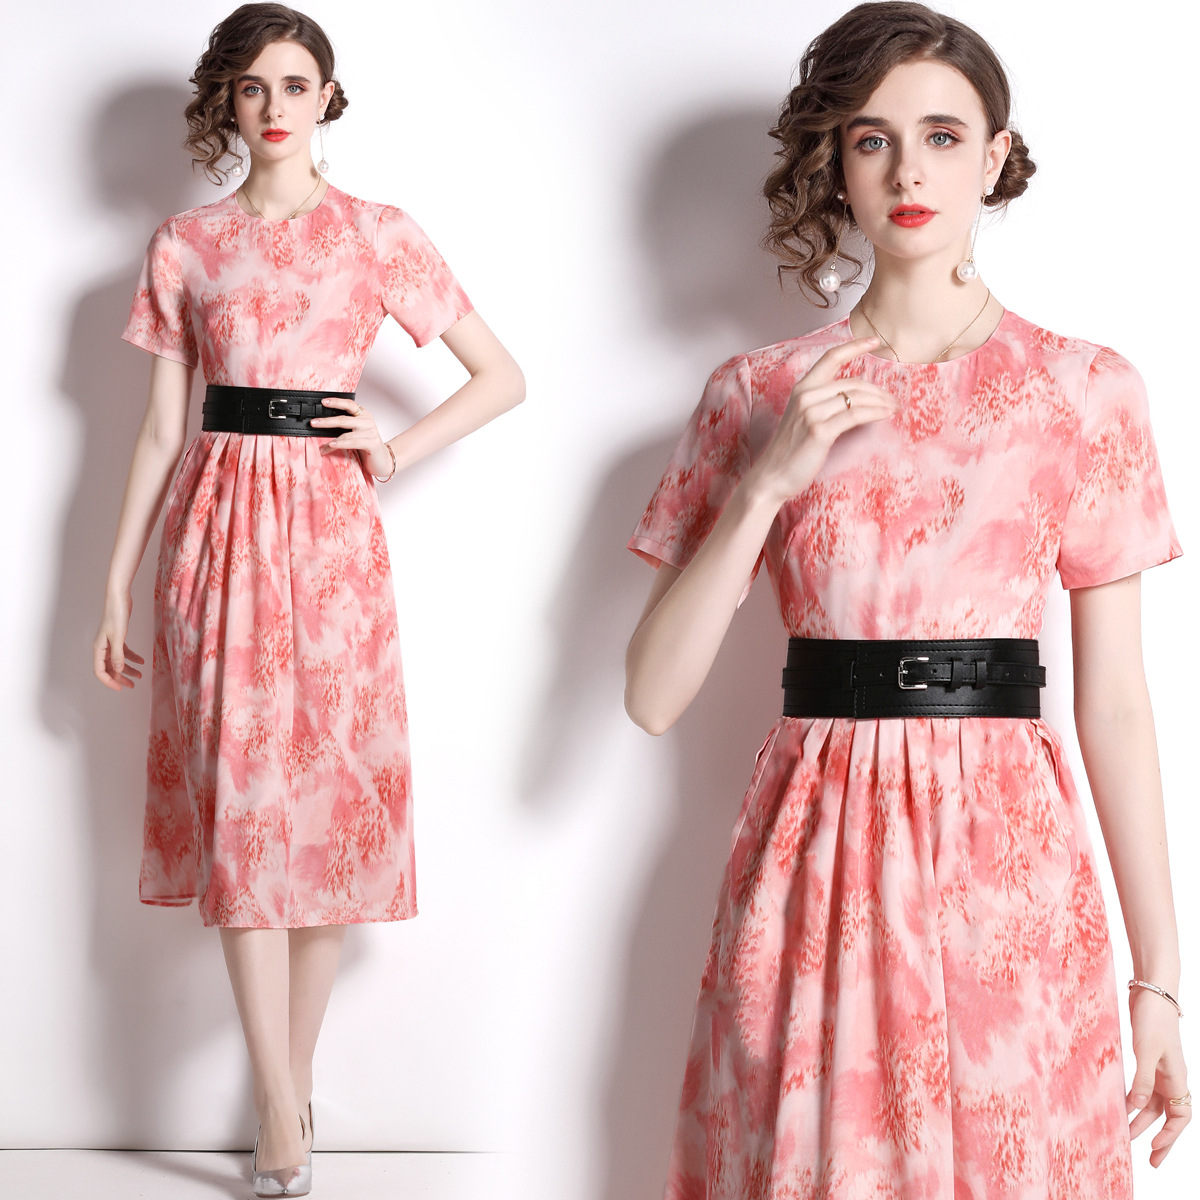 With belt printing pinched waist dress for women